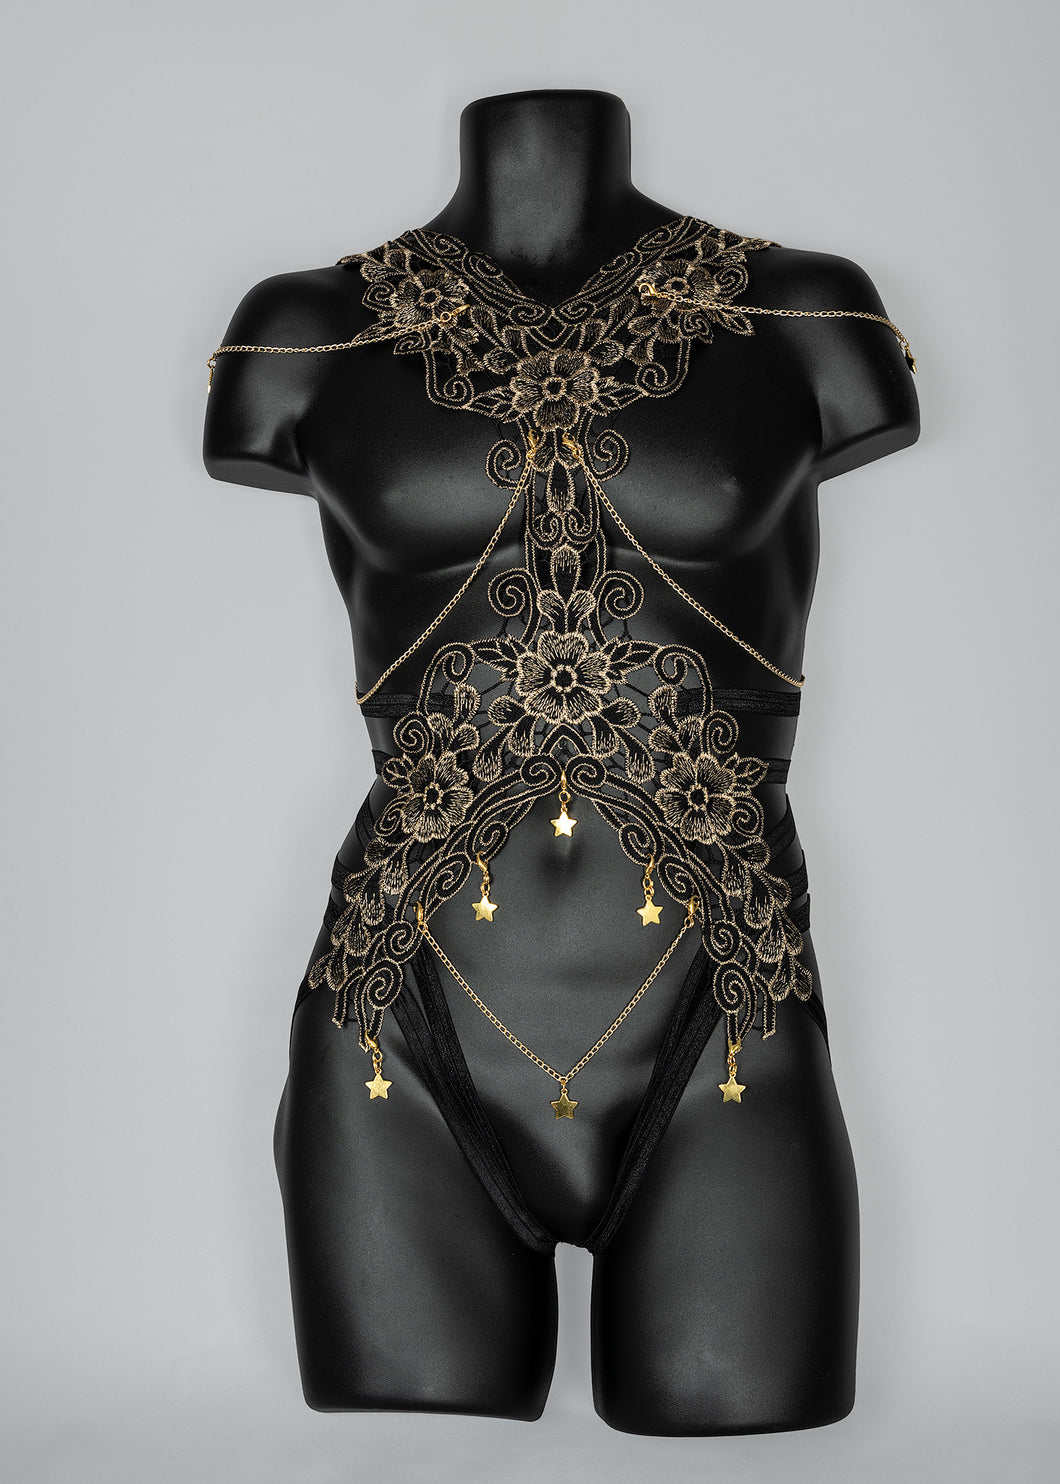 NINEVEH - Gold & Black Lace Bodycage Star Charms & Chains